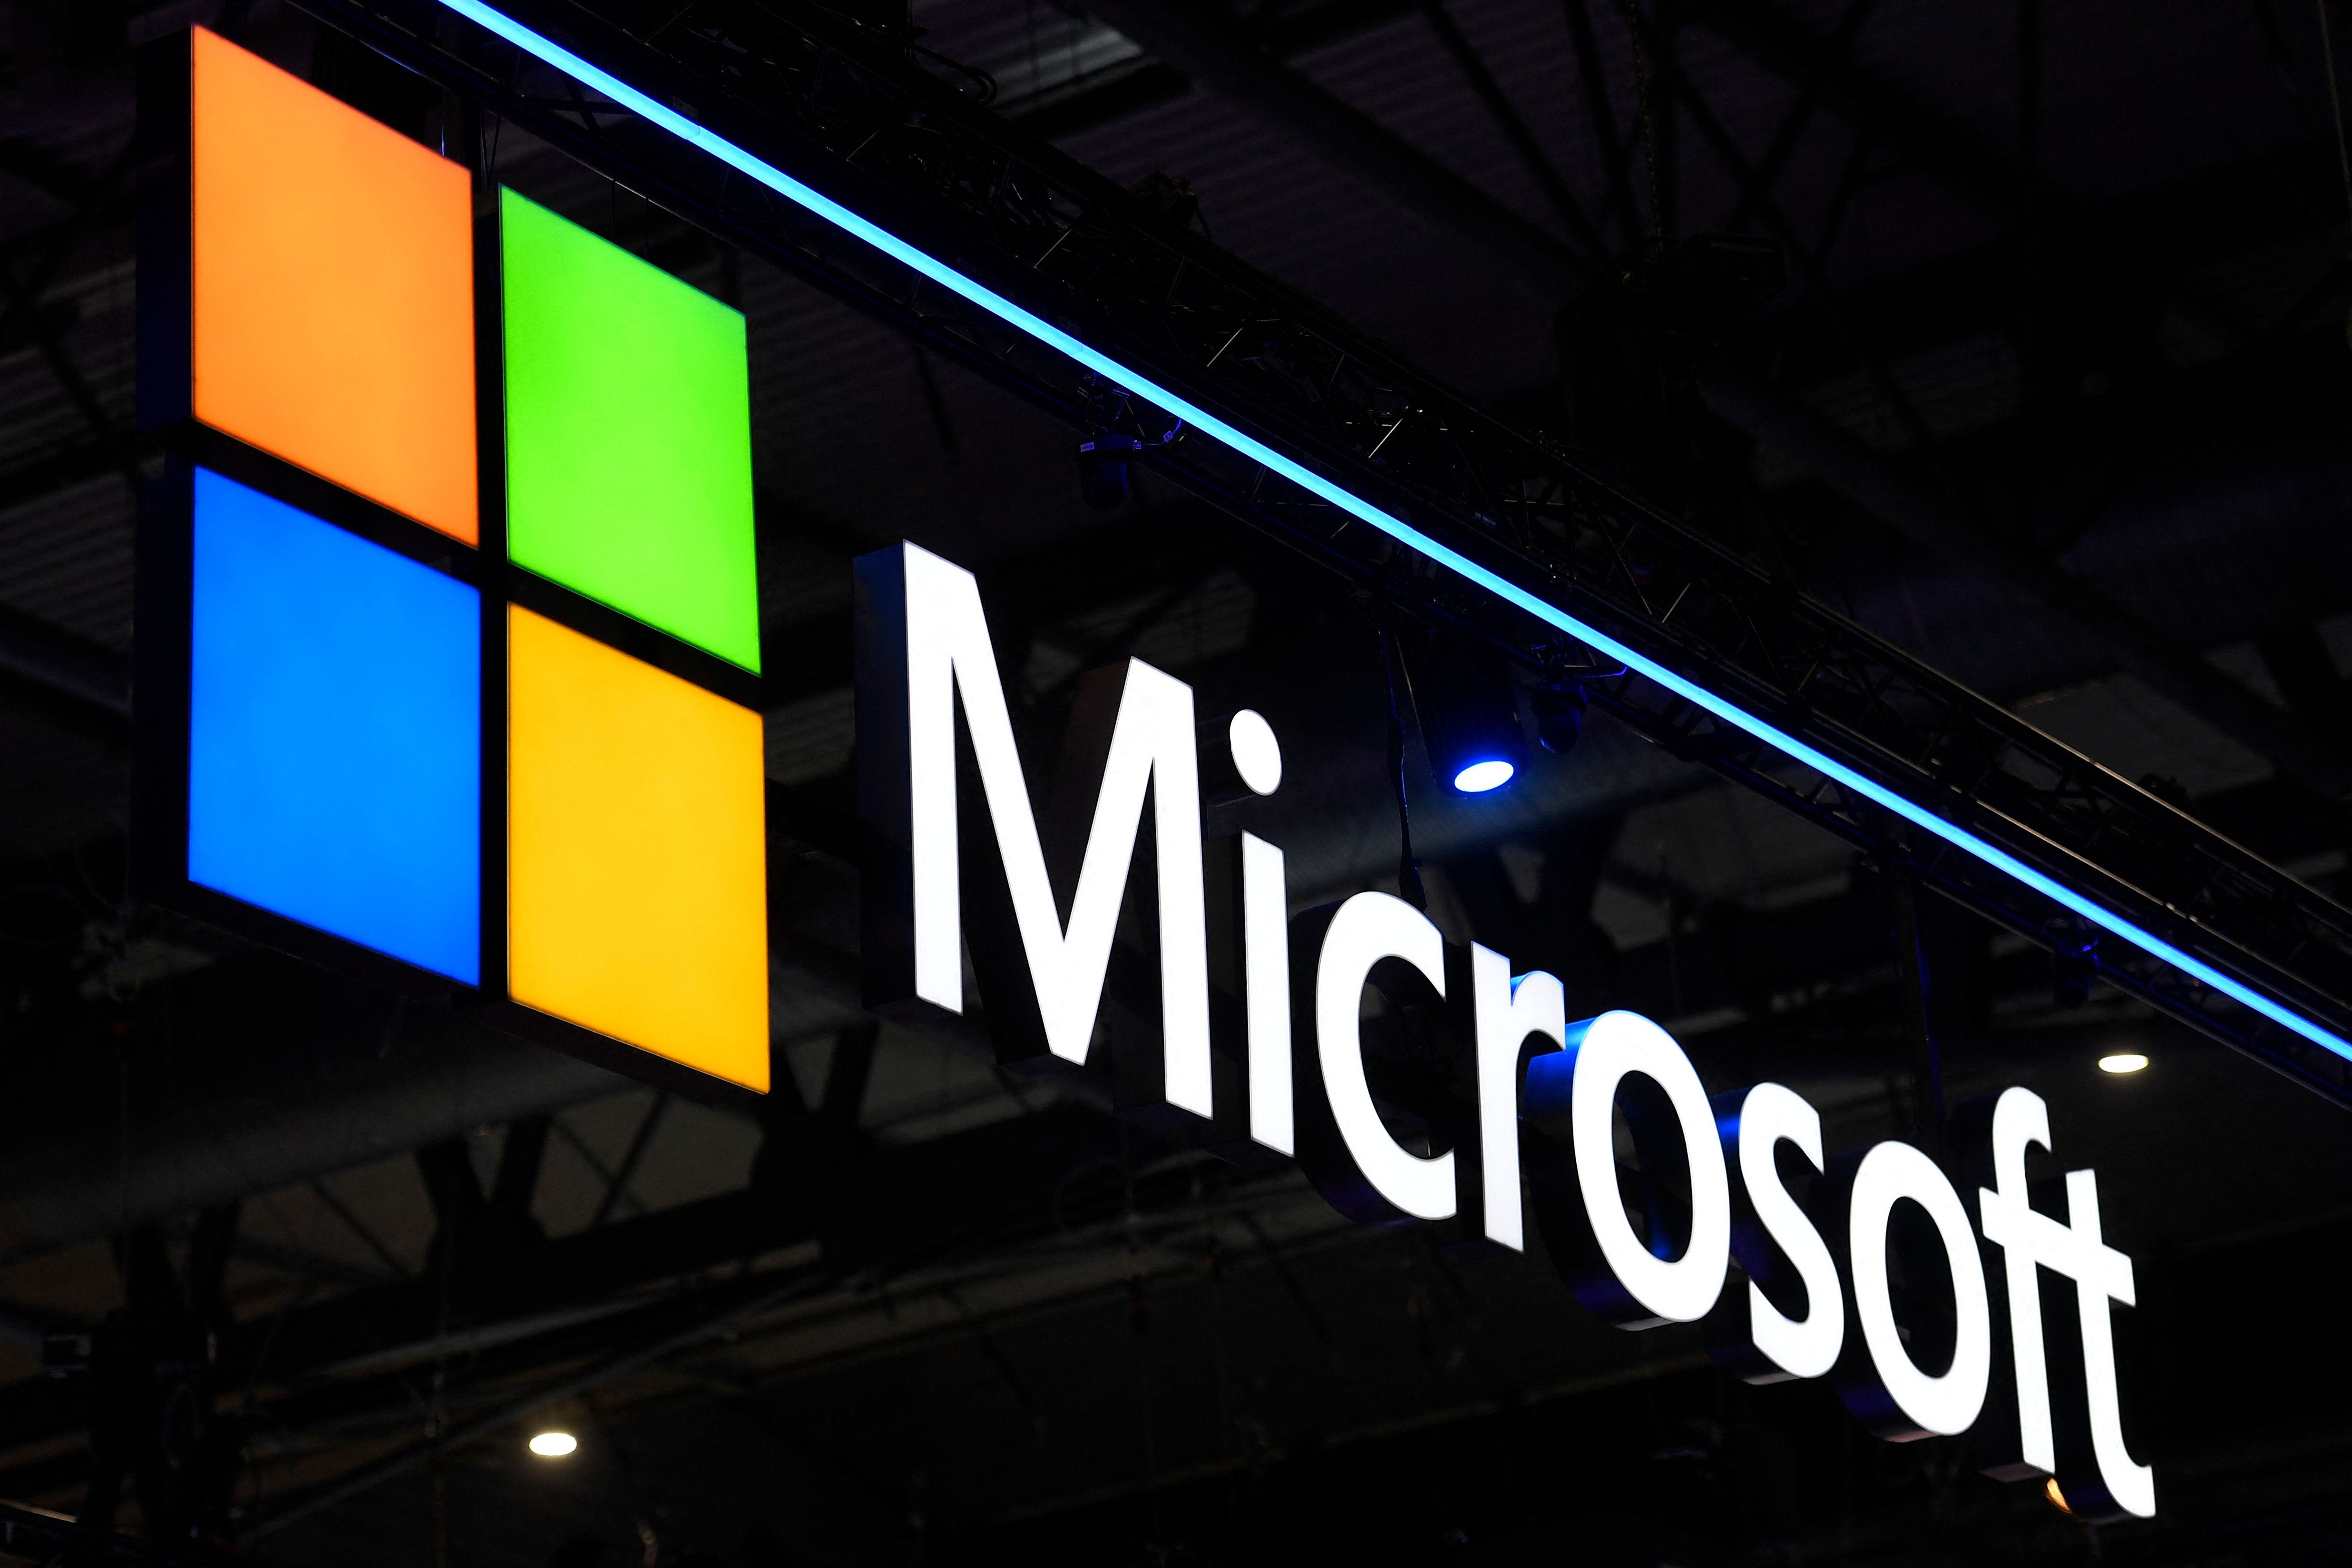 Having tech issues in Cincinnati today? Reports indicate global Microsoft outage